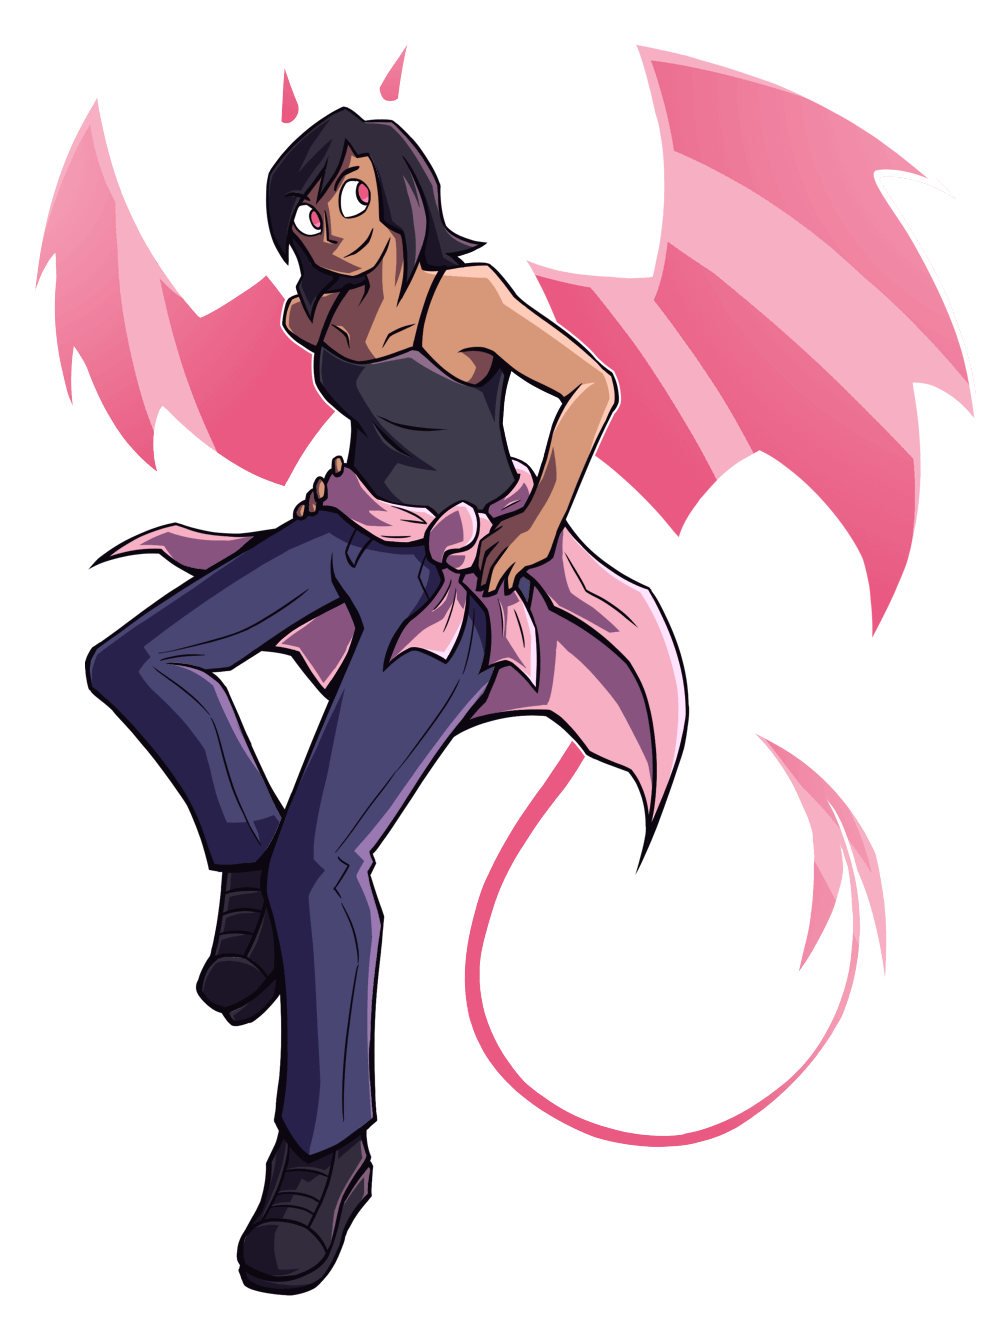 it me! but in a mysterious shadow with a floaty pink set of demon wings, tail and horns.